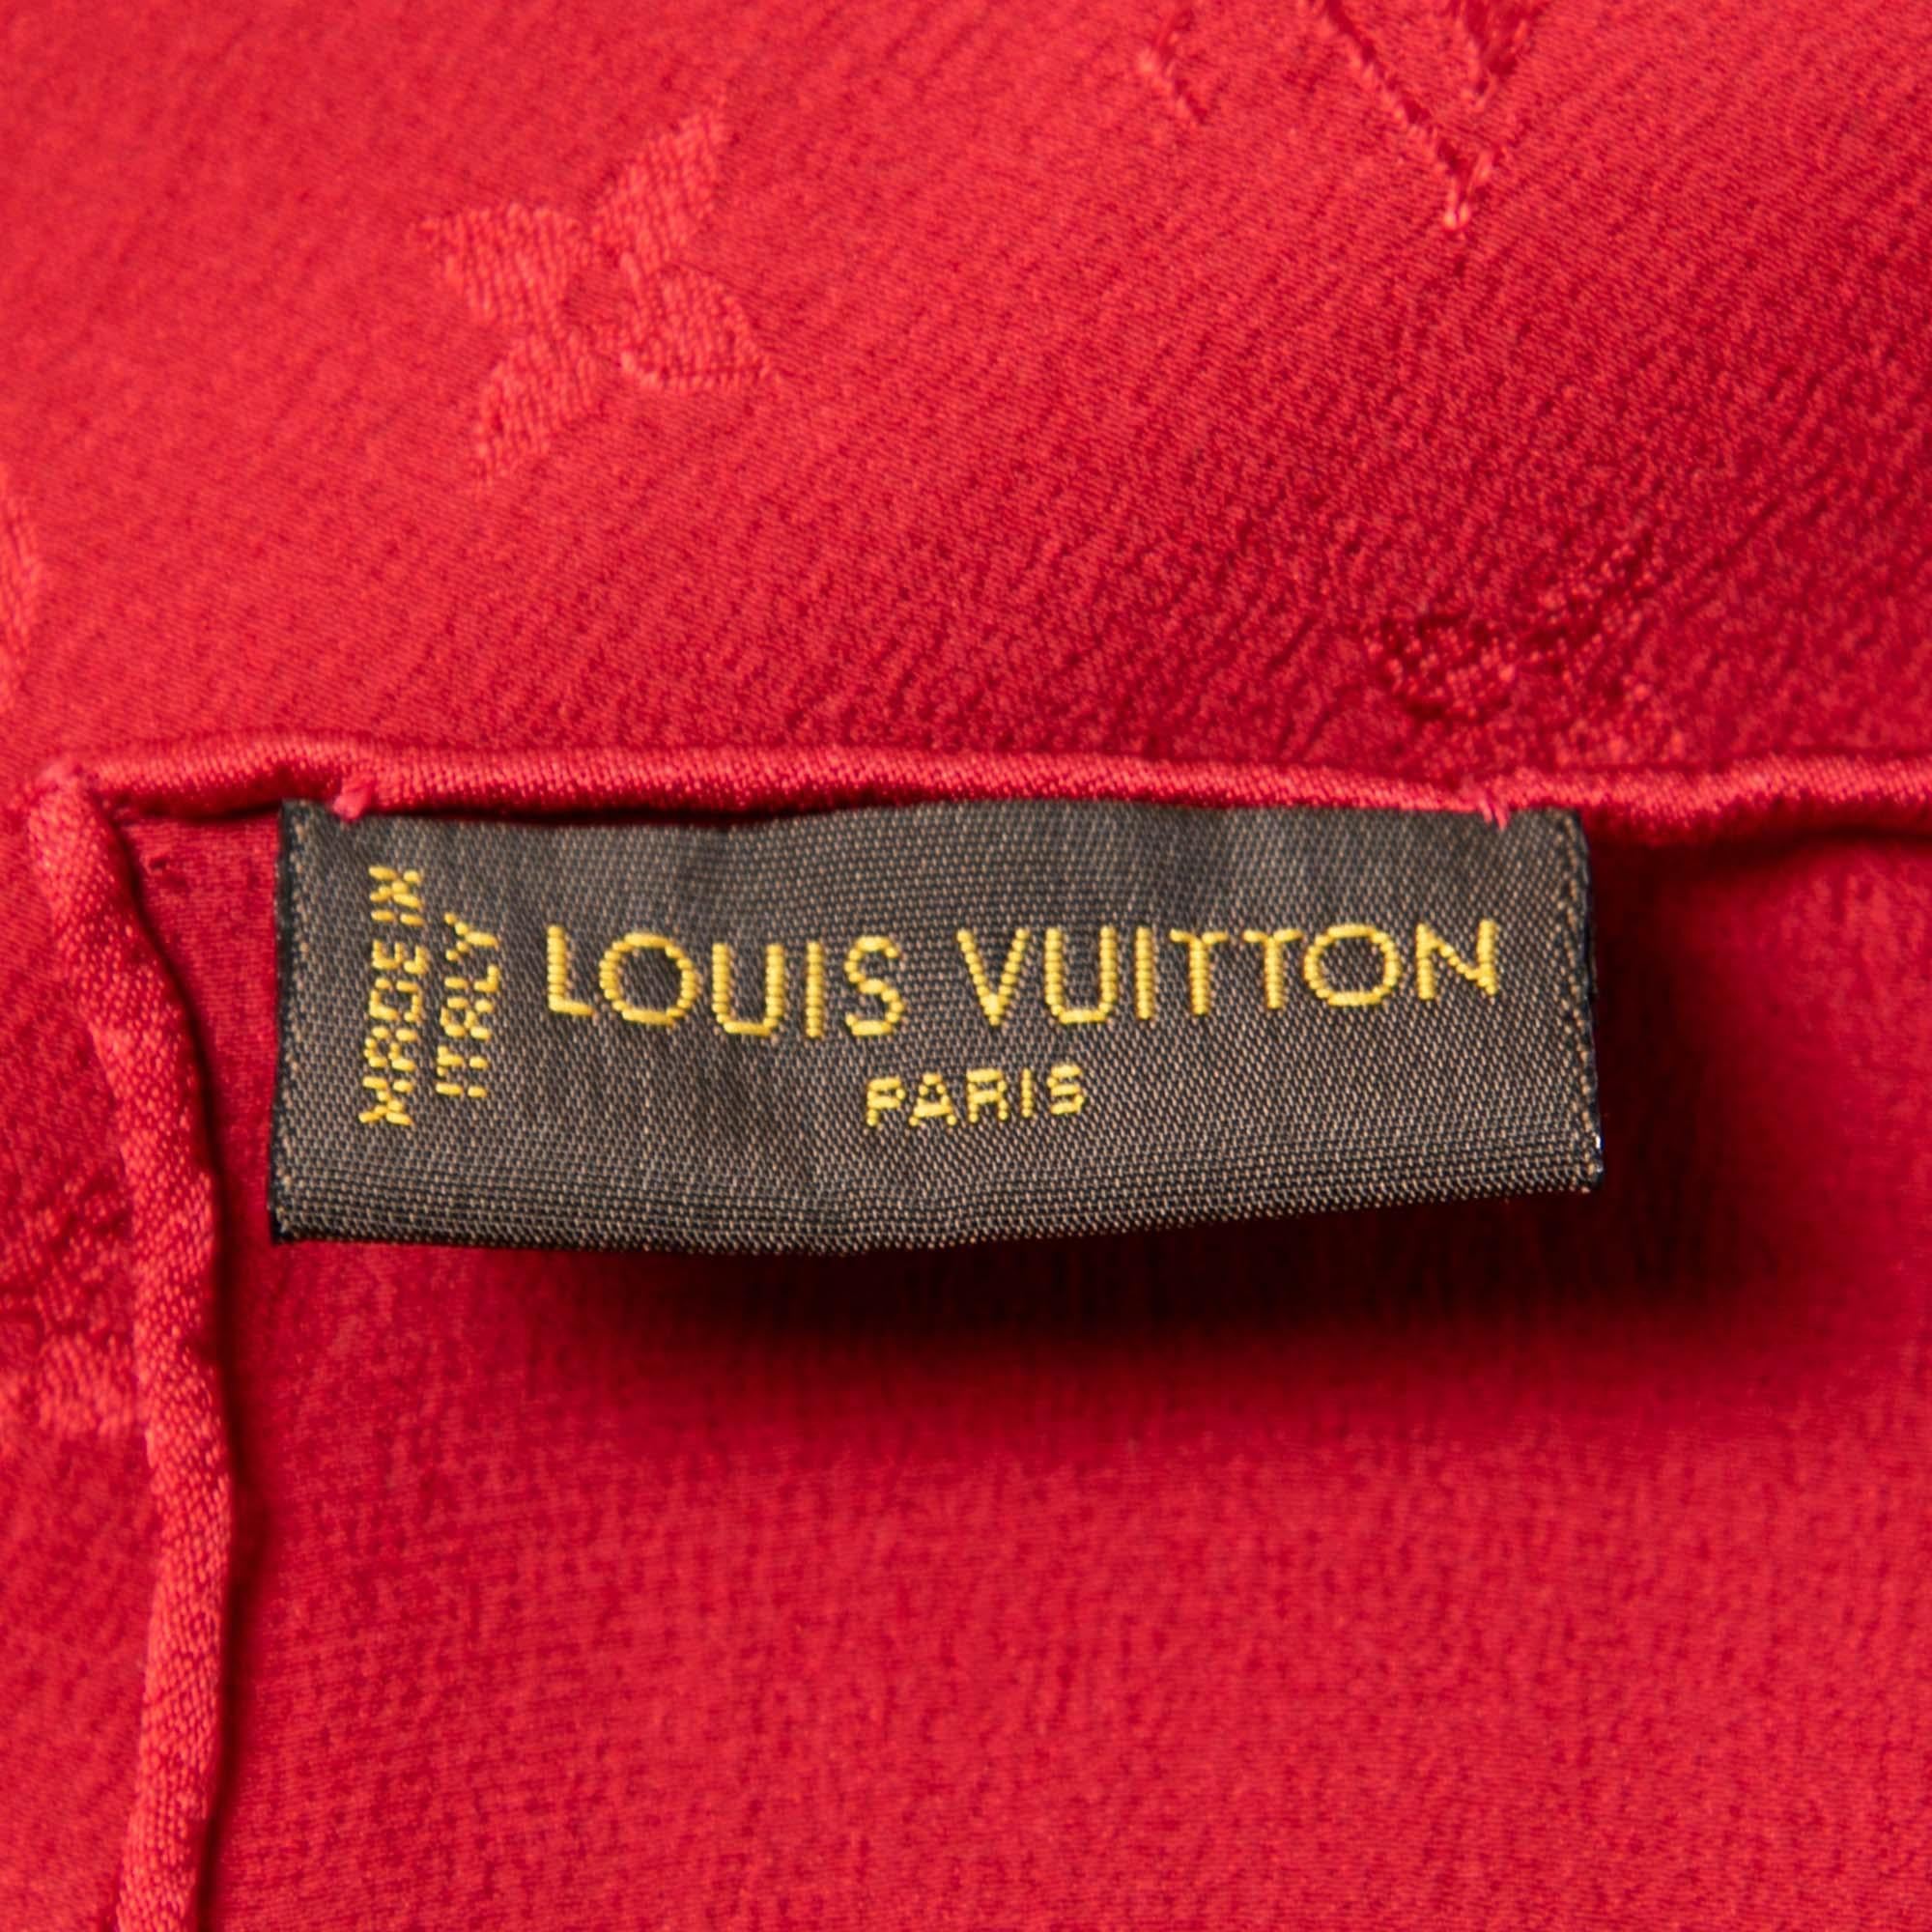 louis vuitton scarf red and black